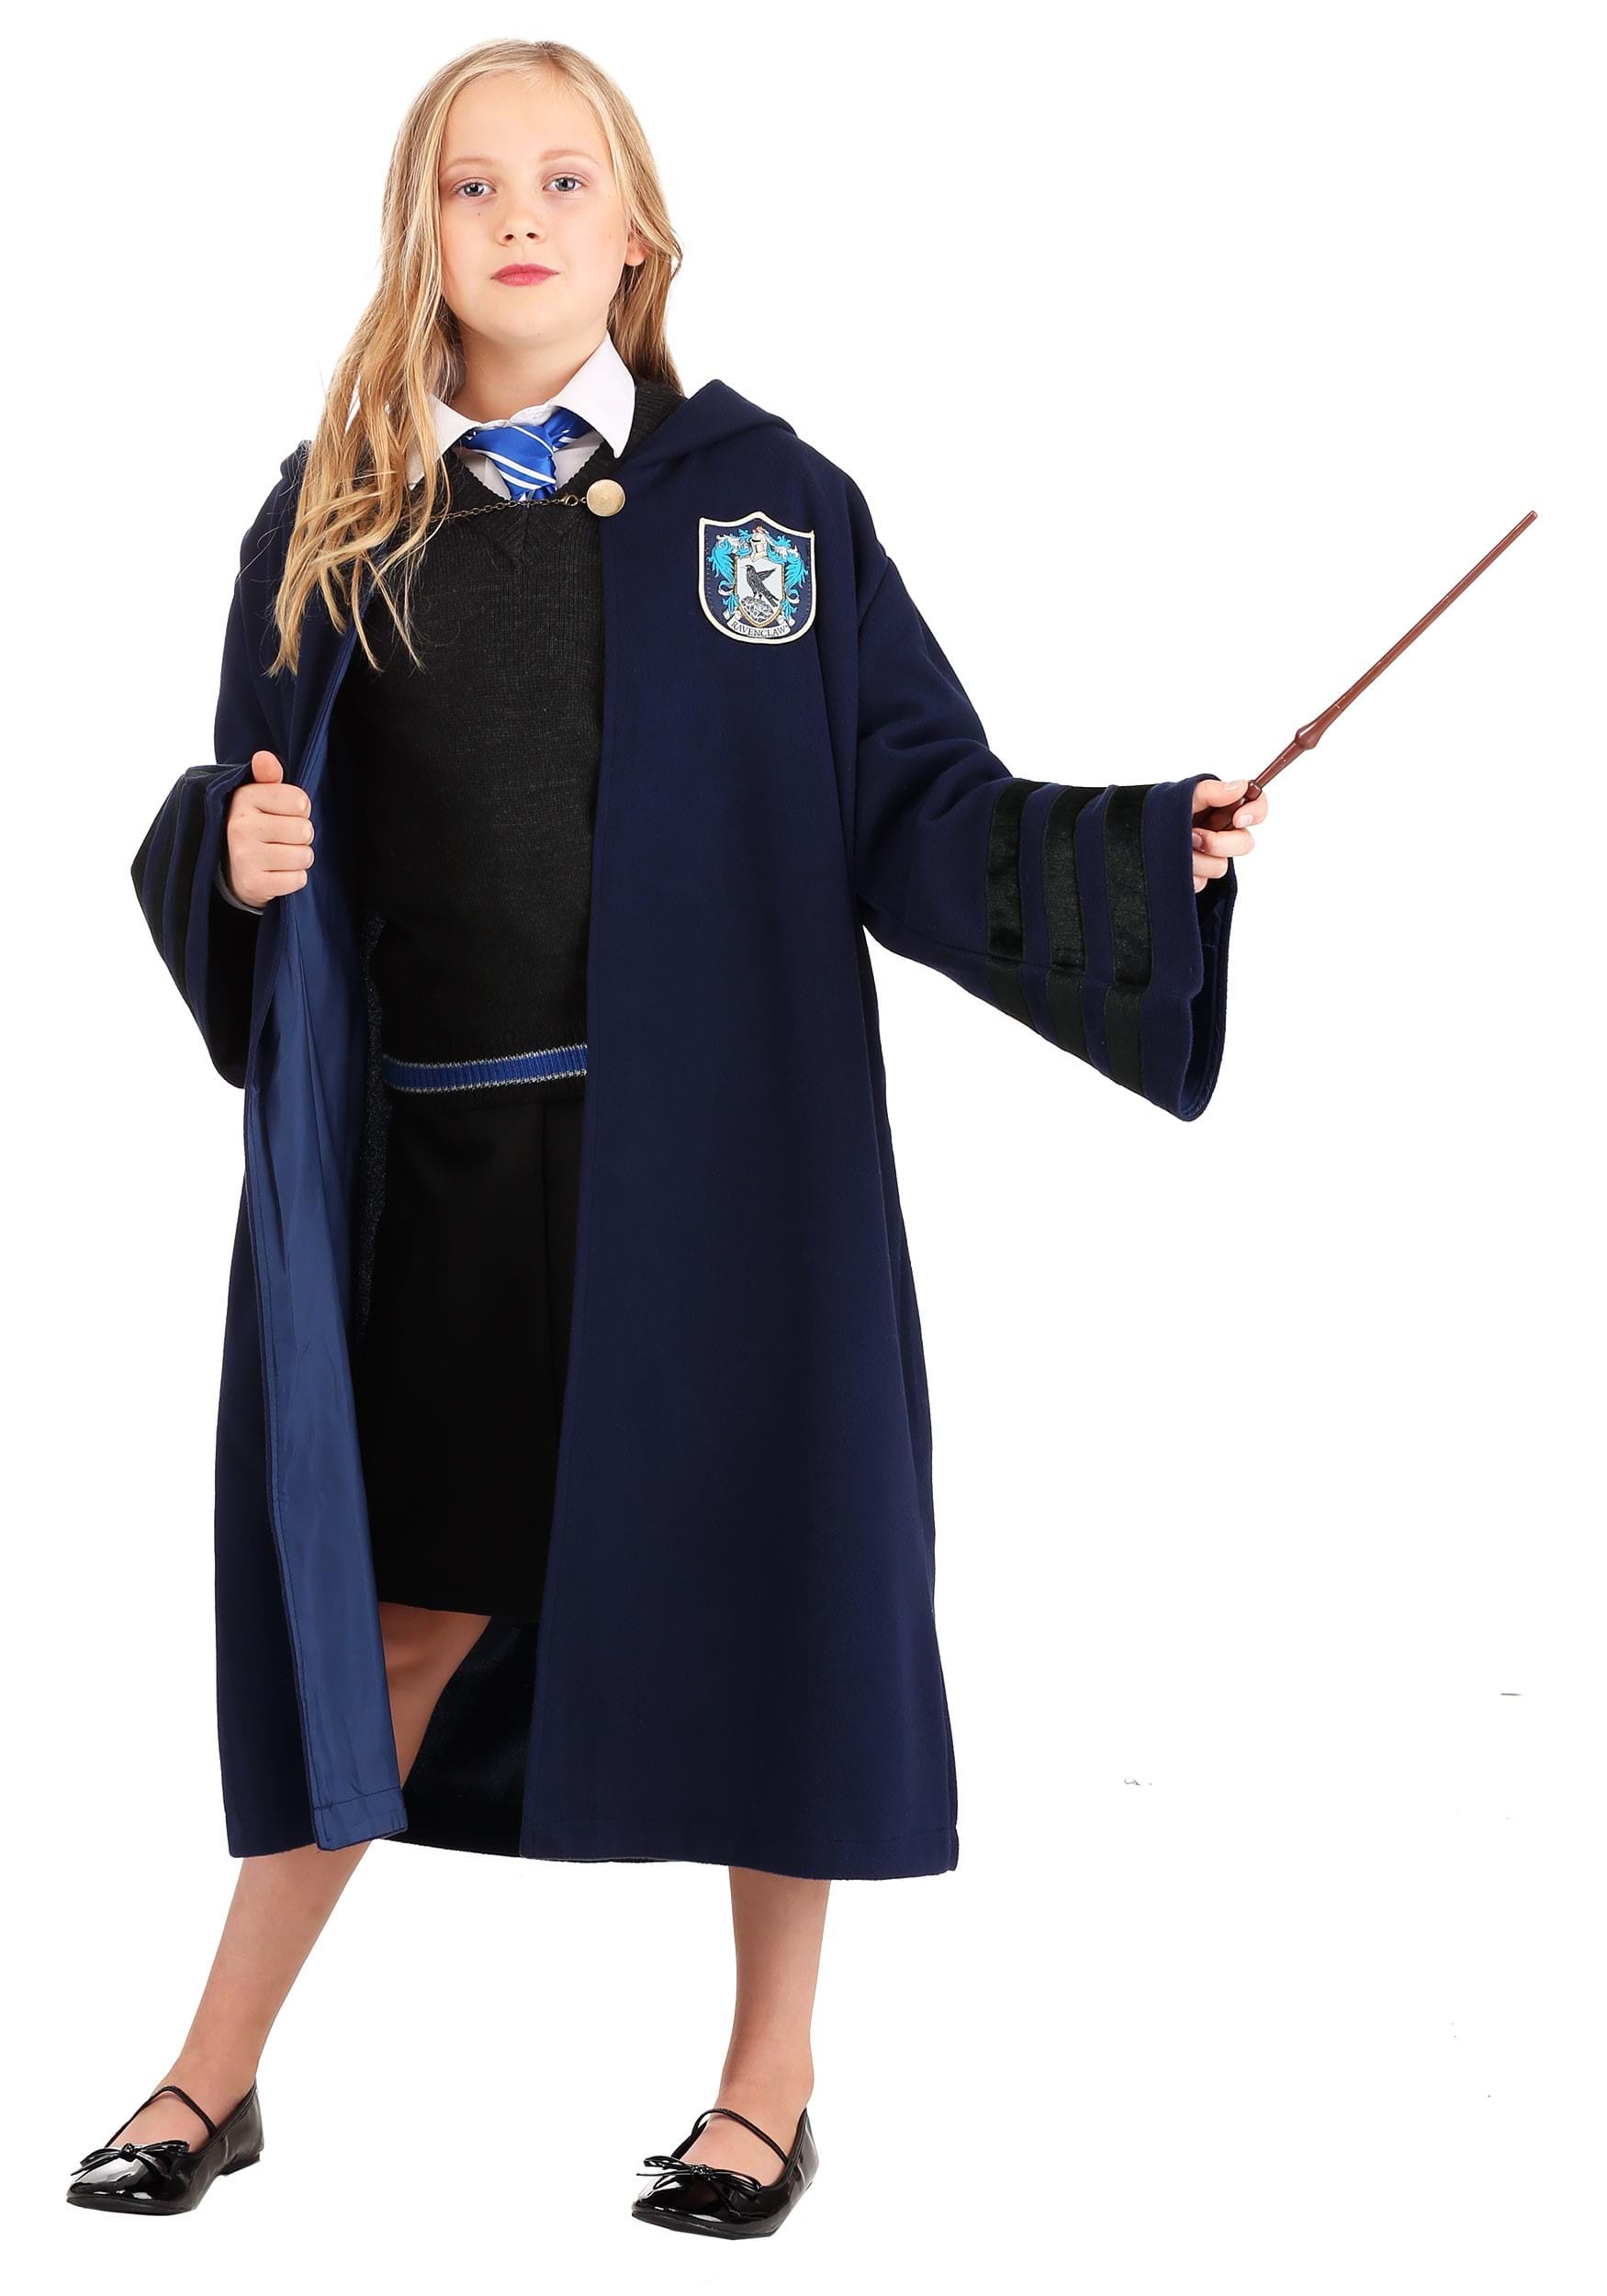 In Stock) Ravenclaw Costume Cosplay Cloak School Uniform Outfits